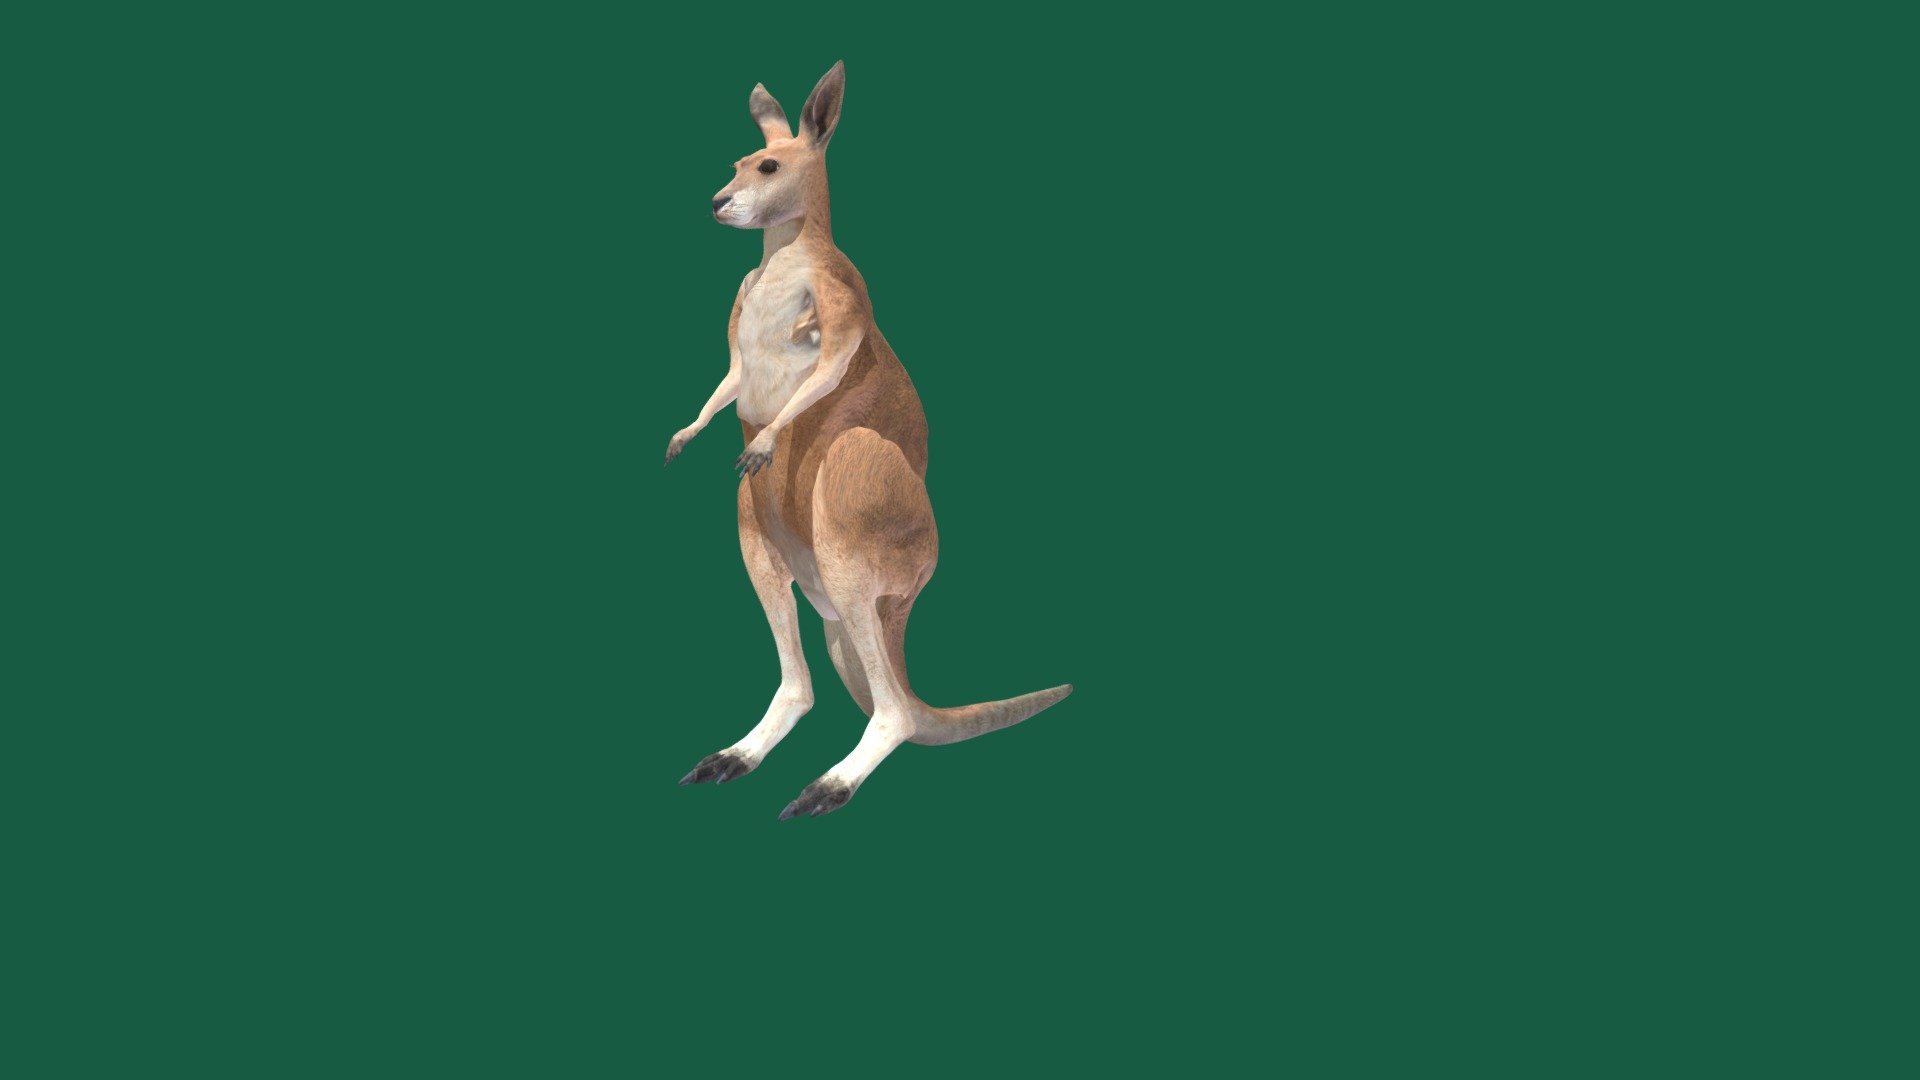 Kangaroo_game_VR_Test
The kangaroo is a marsupial from the family Macropodidae. In common use the term is used to describe the largest species from this family, the red kangaroo, as well as the antilopine kangaroo, eastern grey kangaroo, and western grey kangaroo. Kangaroos are indigenous to Australia and New Guinea 3d model